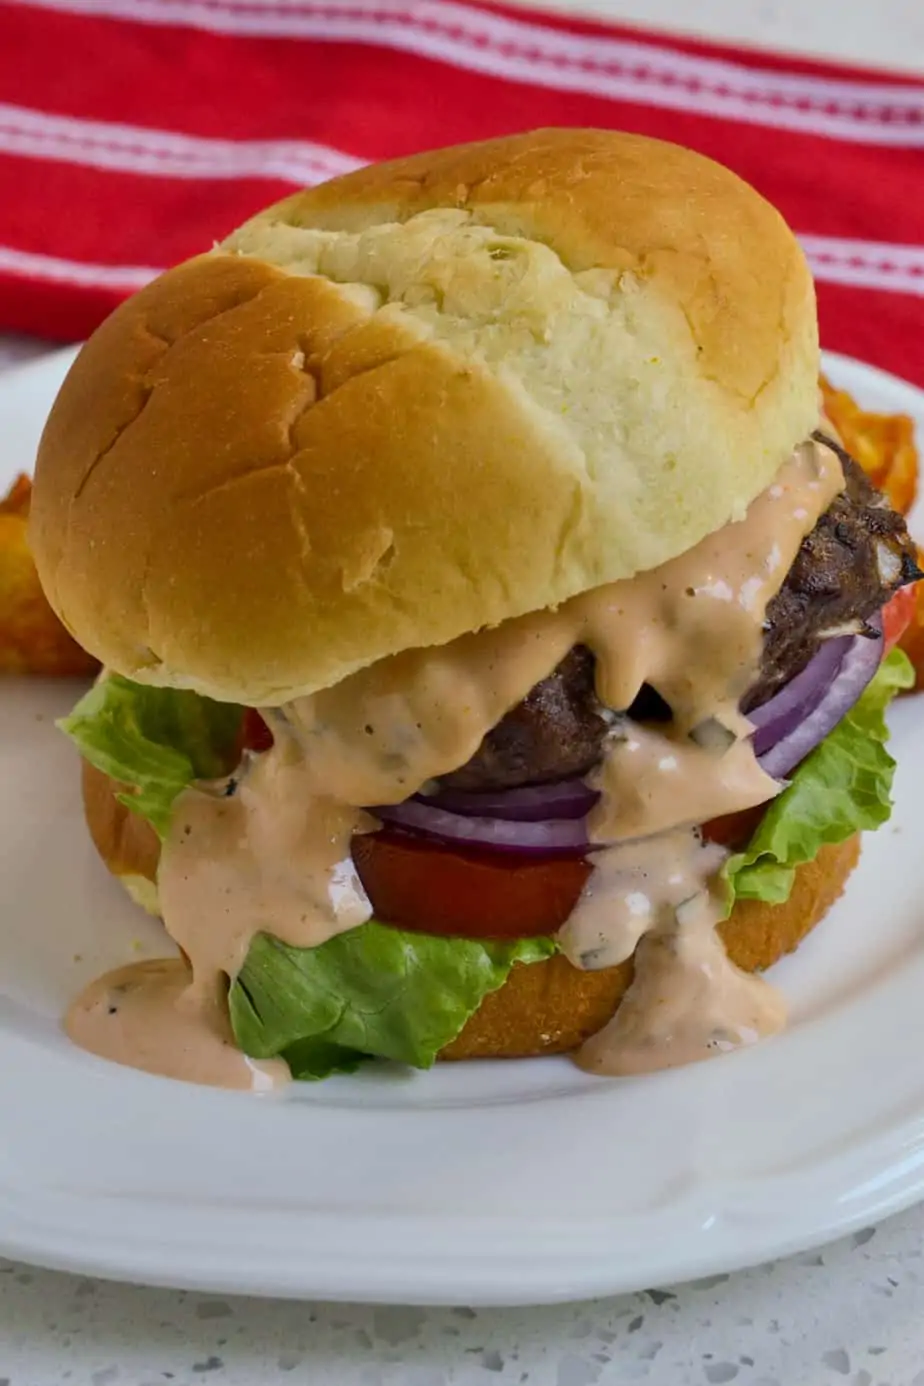 This scrumptious Burger Sauce comes together quickly and easily with a few condiments like mayo, pickle relish, and common seasonings. It is great on burgers, sandwiches, wraps or as a great dipping sauce for fries and onion rings.